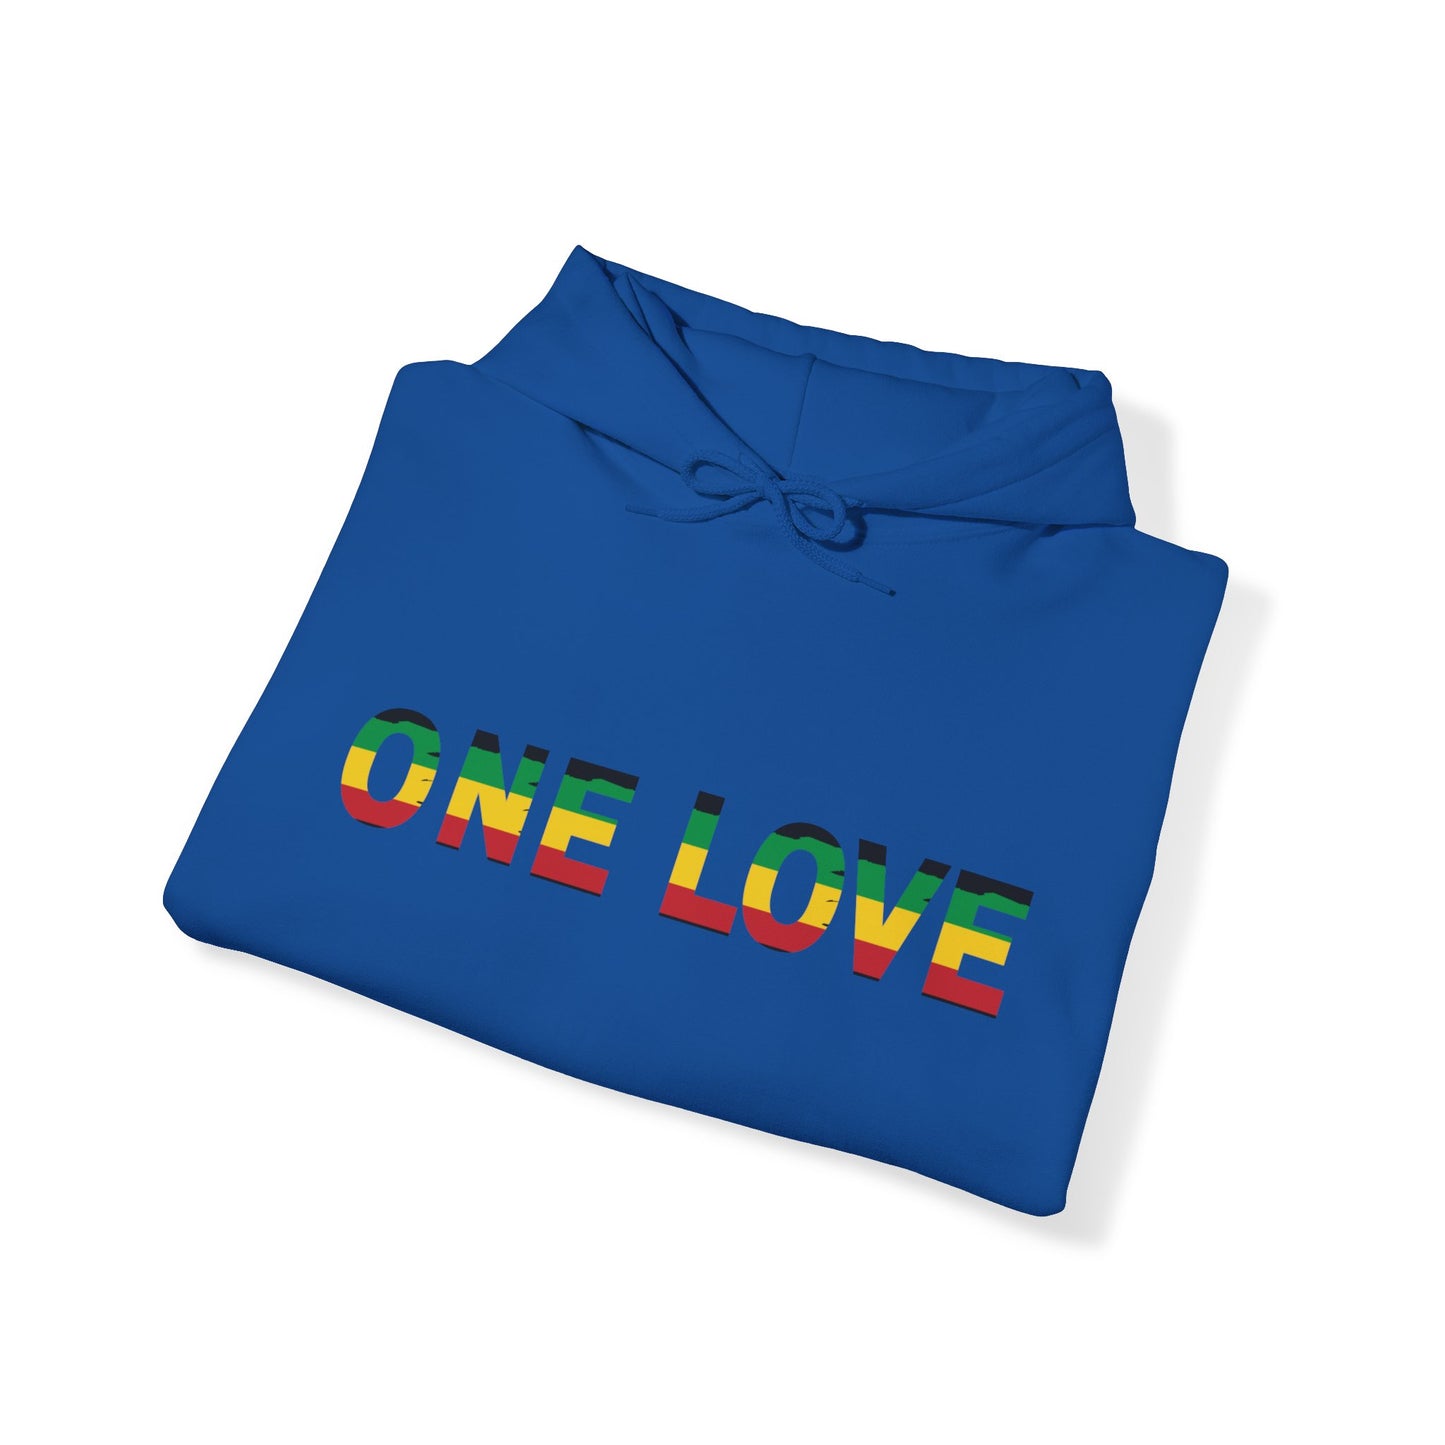 ONE LOVE COLOR HOODED SWEATHIRT GIFT